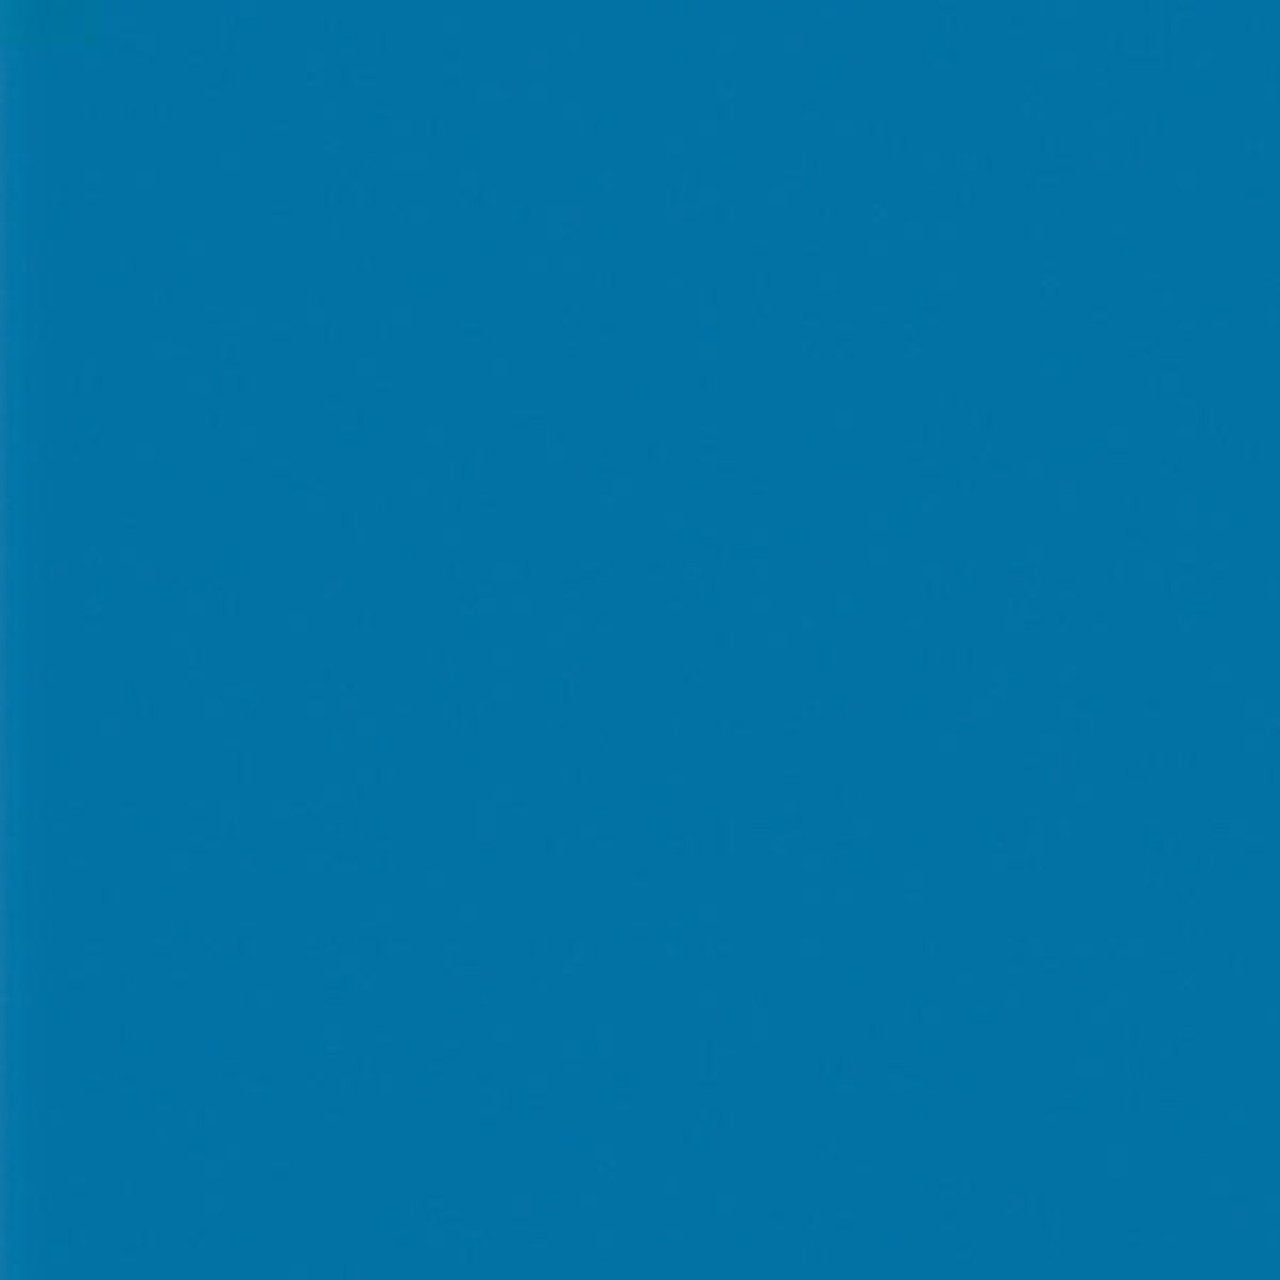 Solid Blue Self-Adhesive Contact Paper - Solid Color Contact Paper - Gifted  Parrot